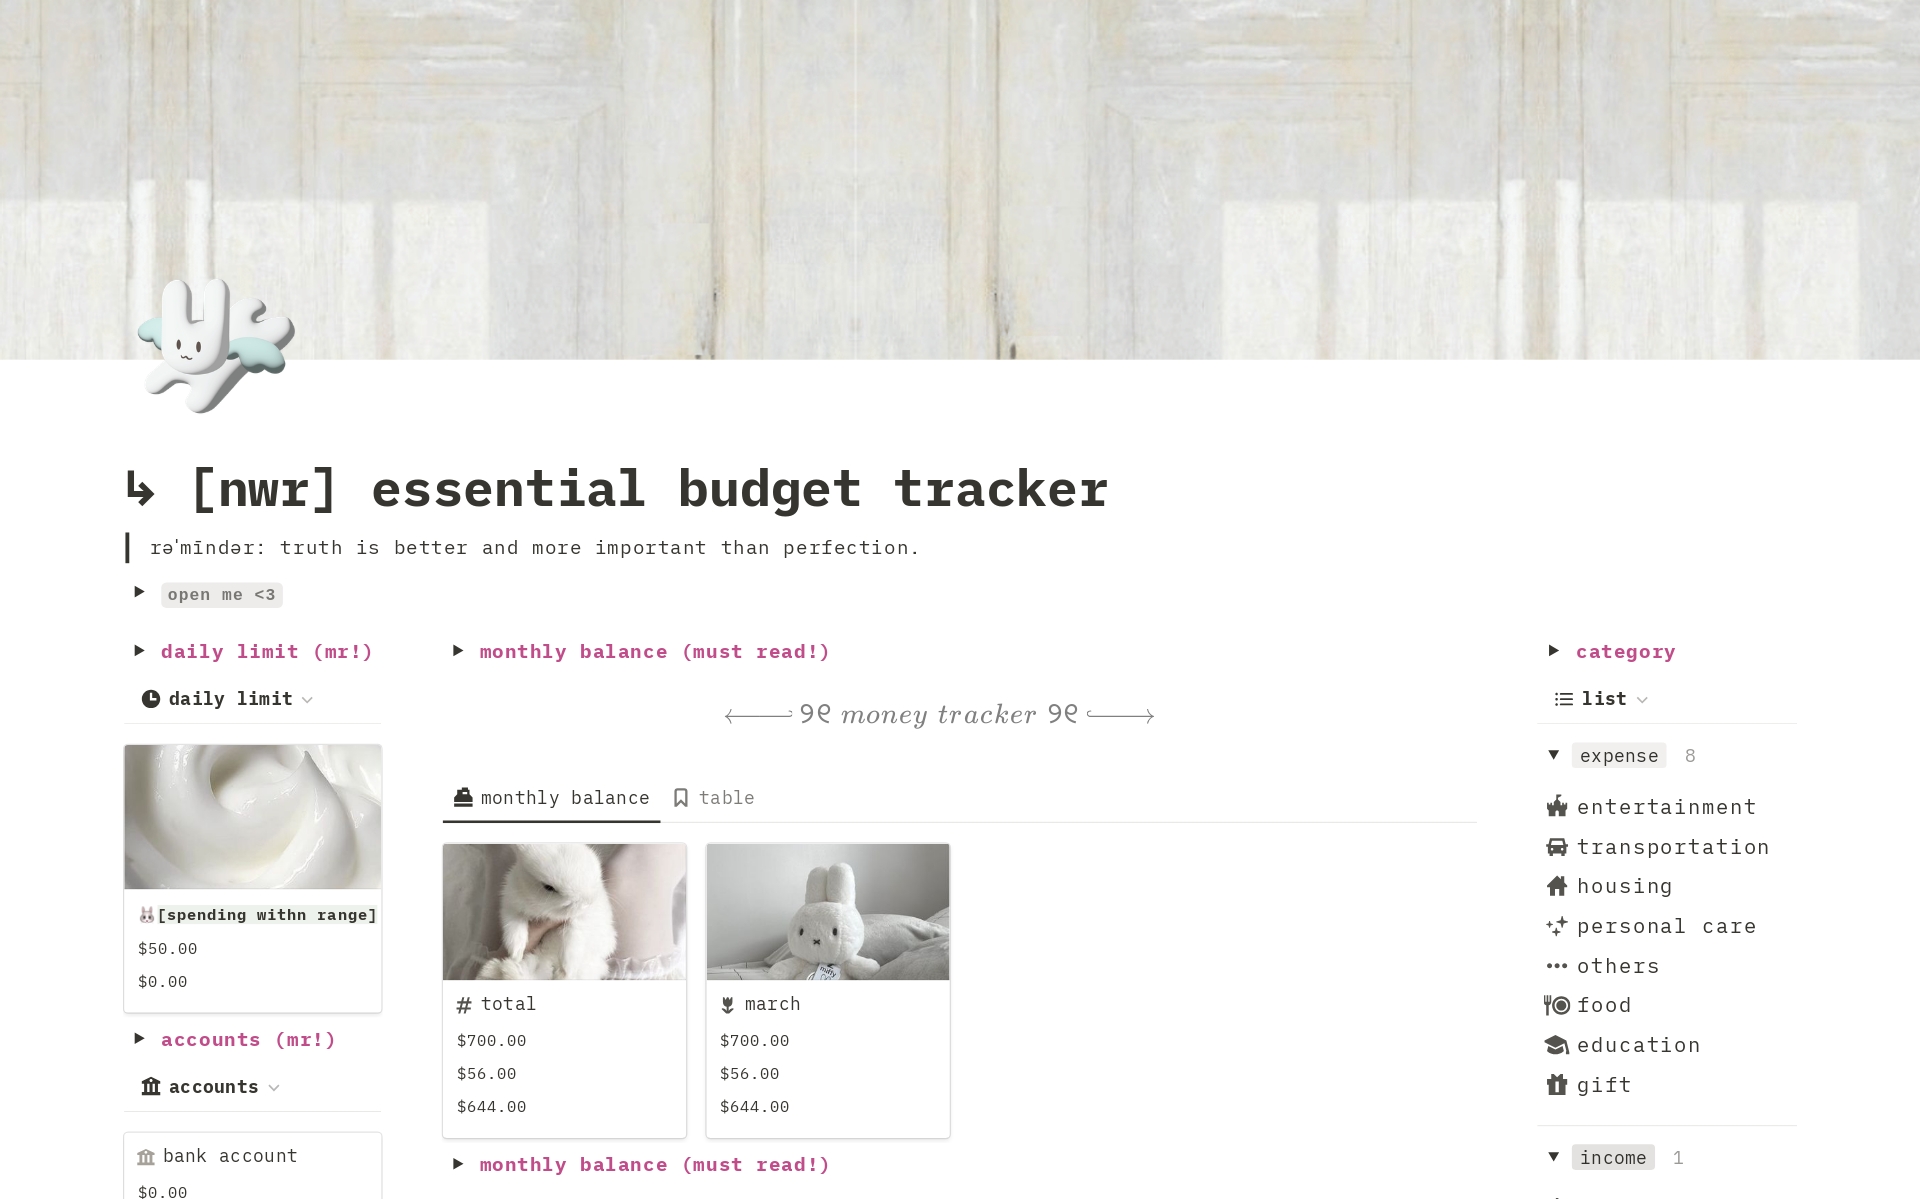 The Essential Budget Tracker helps you take control of your finances by allowing you to set daily spending limits, manage all your accounts, and visualise your savings goals. 